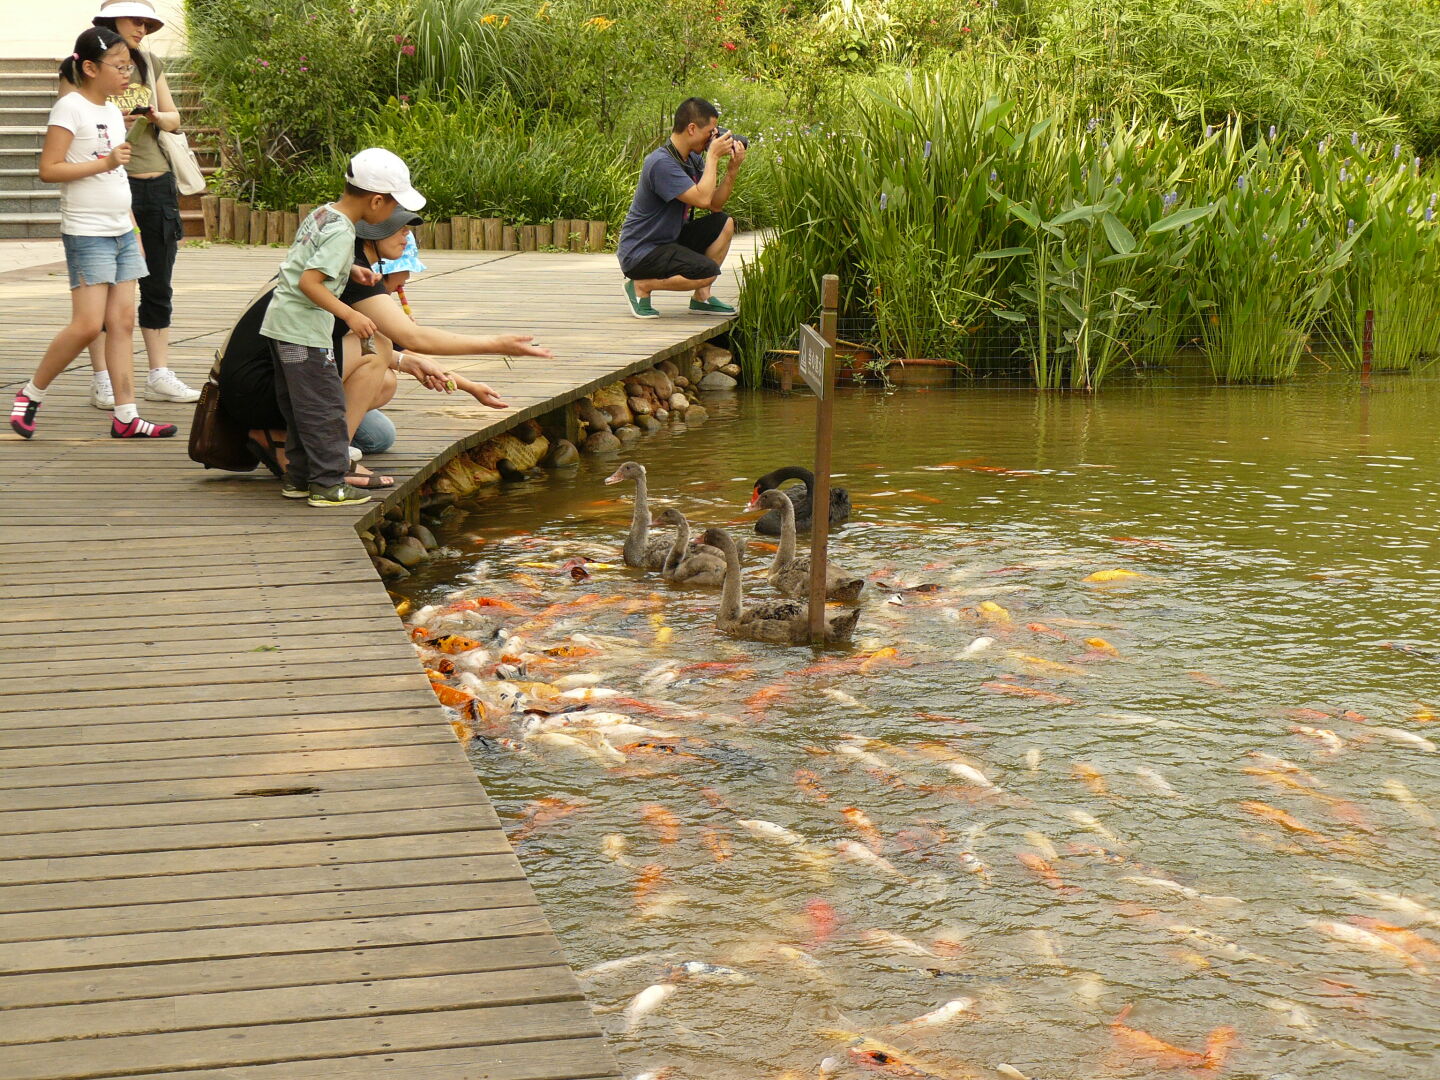 The swans were only mildly irritated by the goldfish.